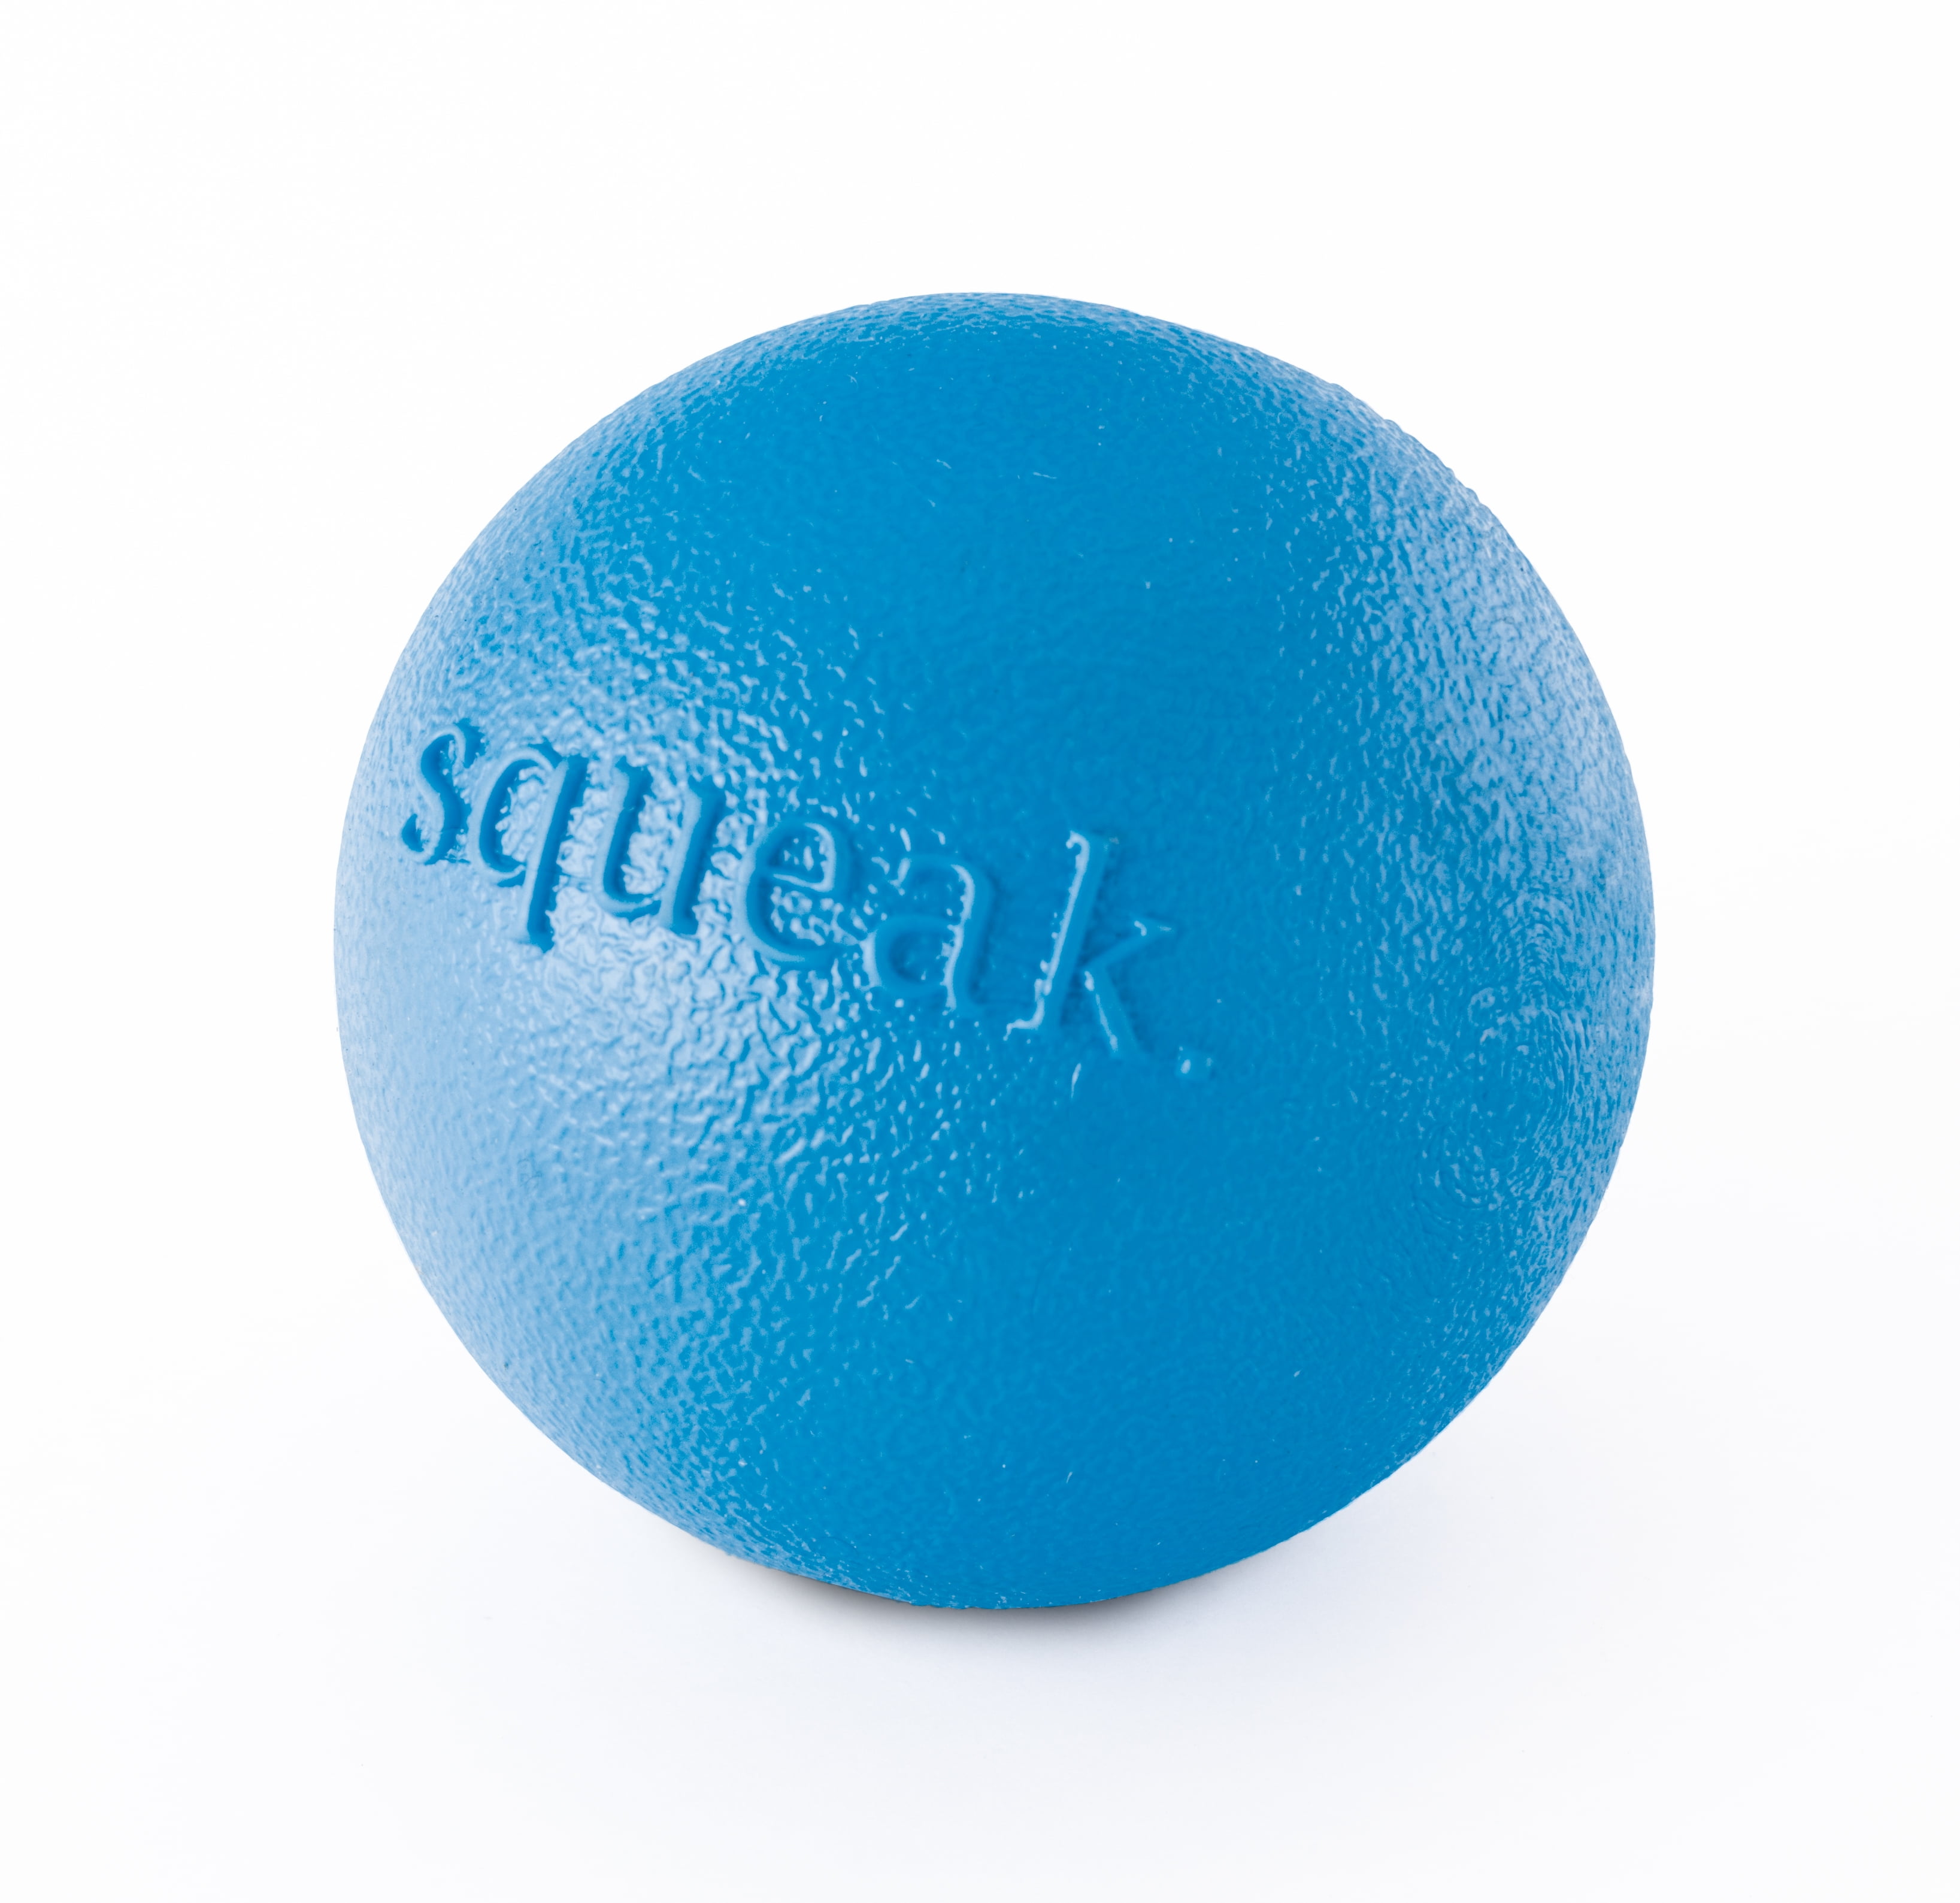 Oh00635 3 In. Orbee Tuff Squeak Ball, Blue